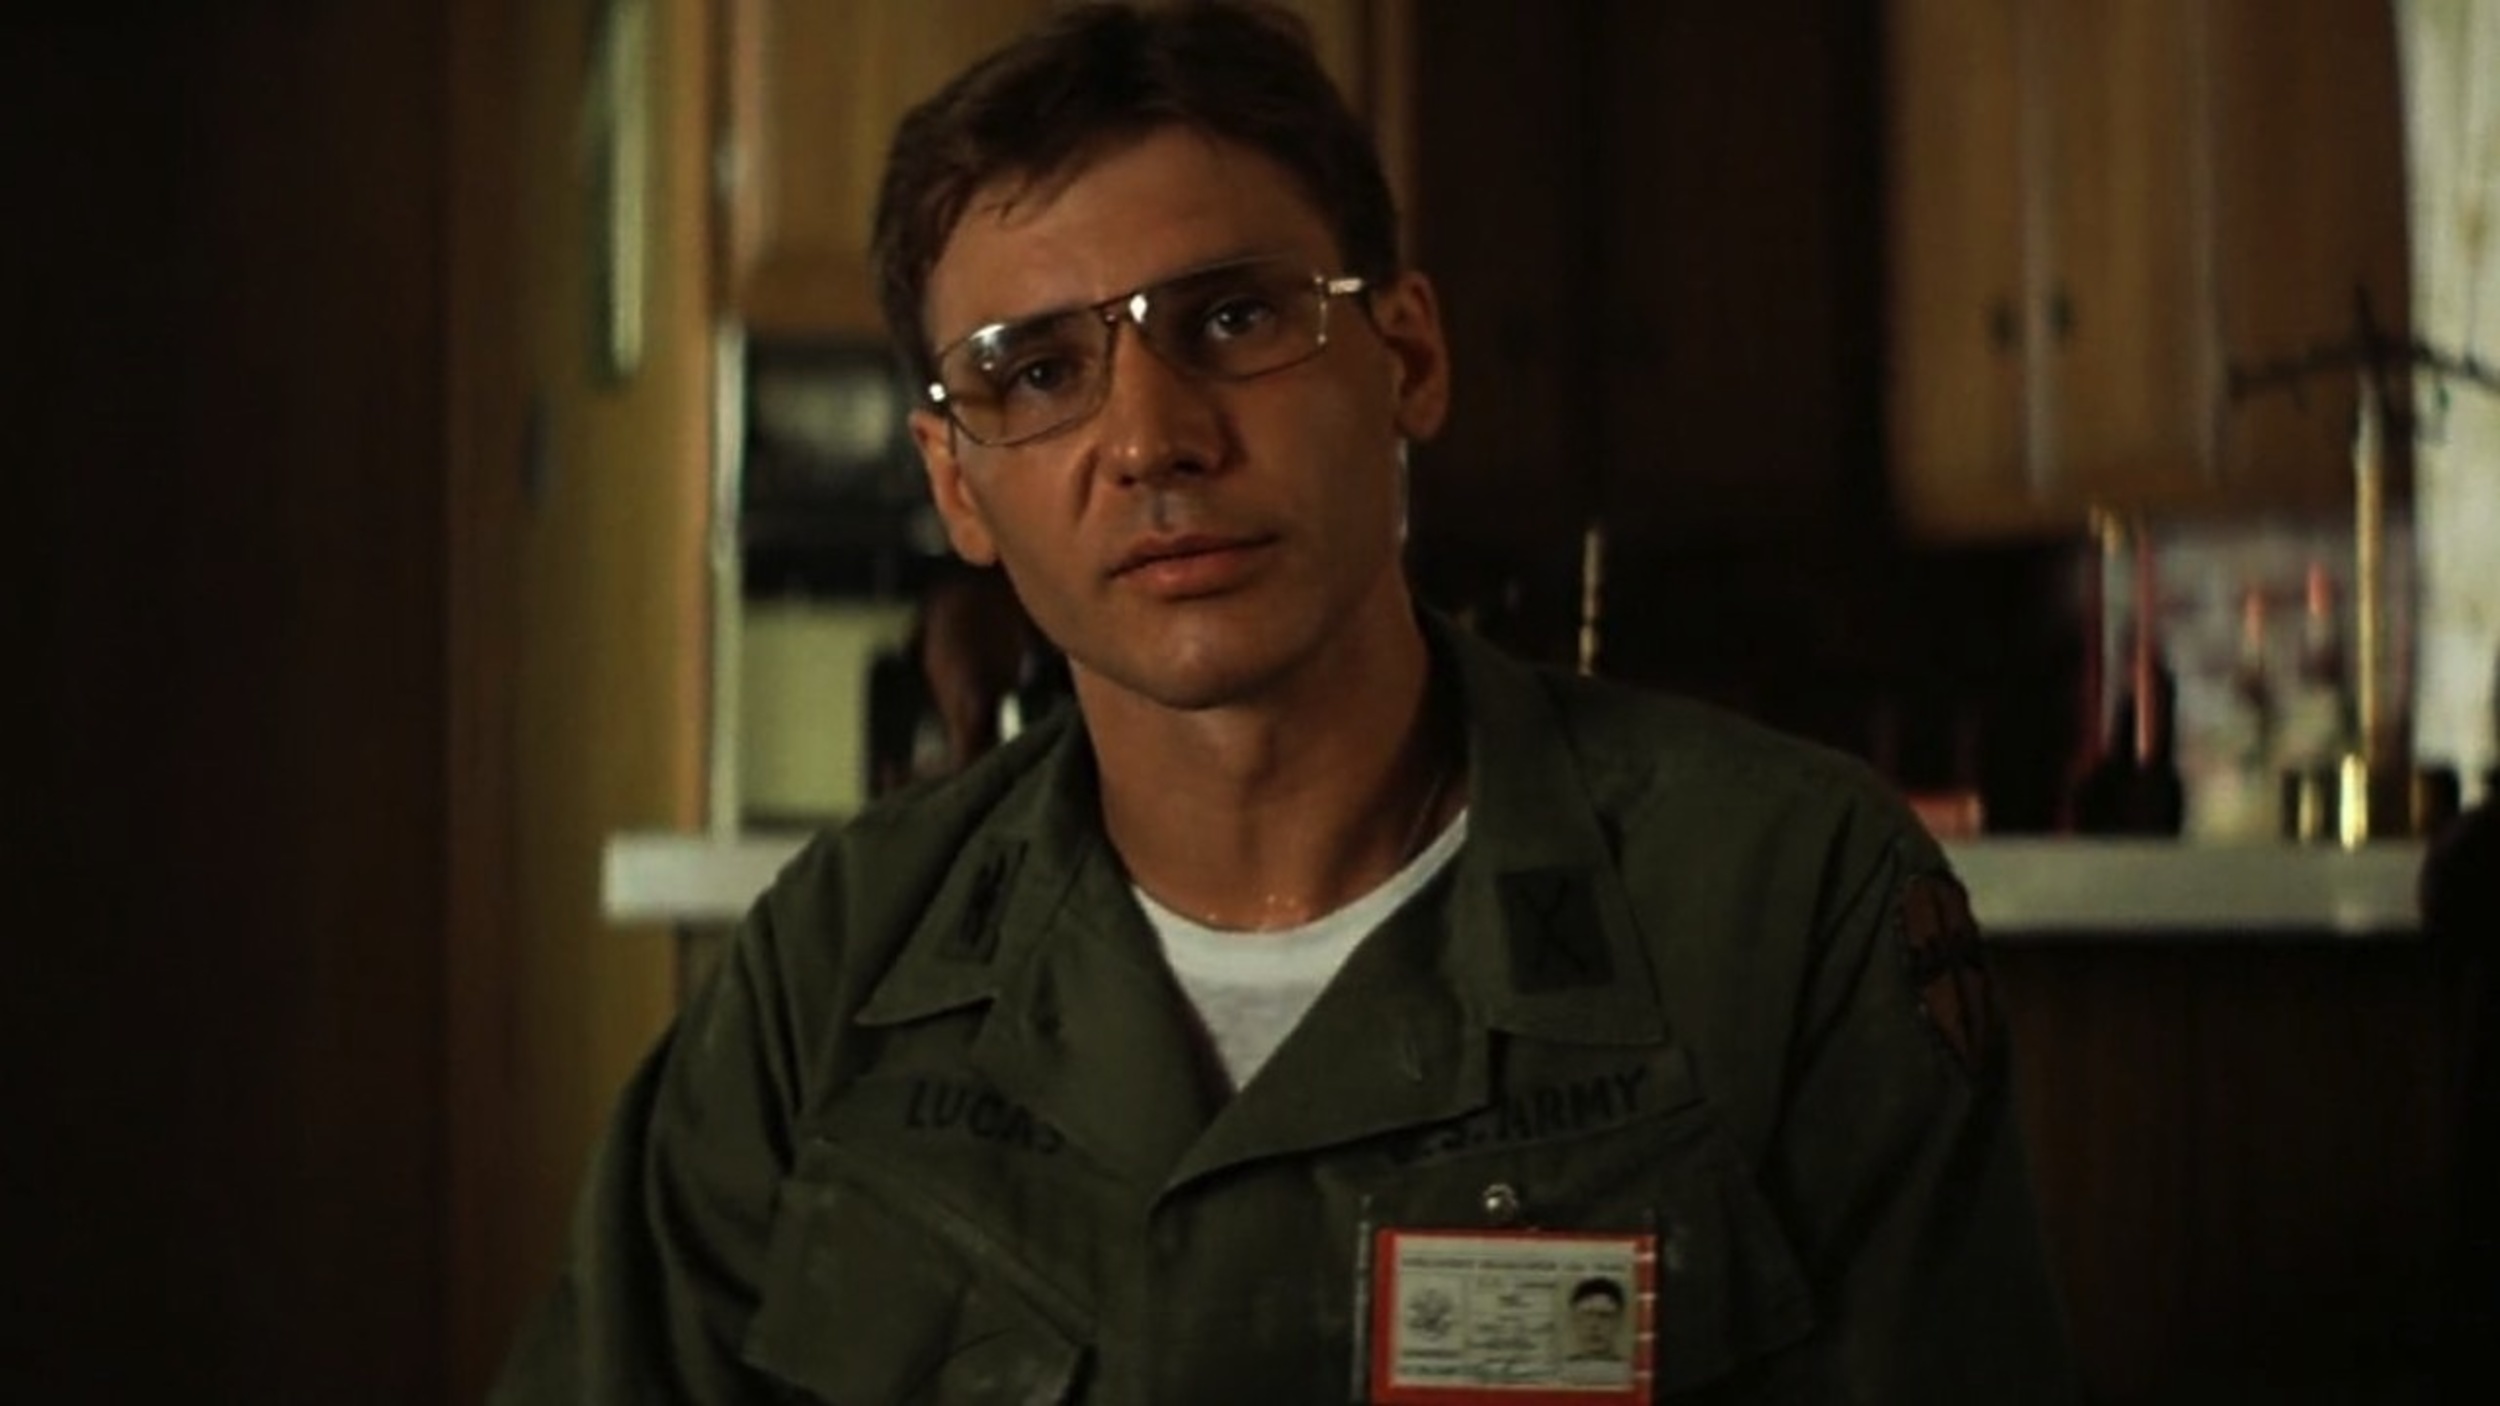 <p>“Star Wars” was so successful that his small role in “Apocalypse Now” is considered a notable cameo as opposed to a working actor’s gig. Ford plays Colonel Lucas, a name given to him by Coppola as a shout-out to his buddy George. It’s definitely a memorable role, as Ford delivers the famous line, “Terminate, with extreme prejudice.”</p><p><a href='https://www.msn.com/en-us/community/channel/vid-cj9pqbr0vn9in2b6ddcd8sfgpfq6x6utp44fssrv6mc2gtybw0us'>Follow us on MSN to see more of our exclusive entertainment content.</a></p>